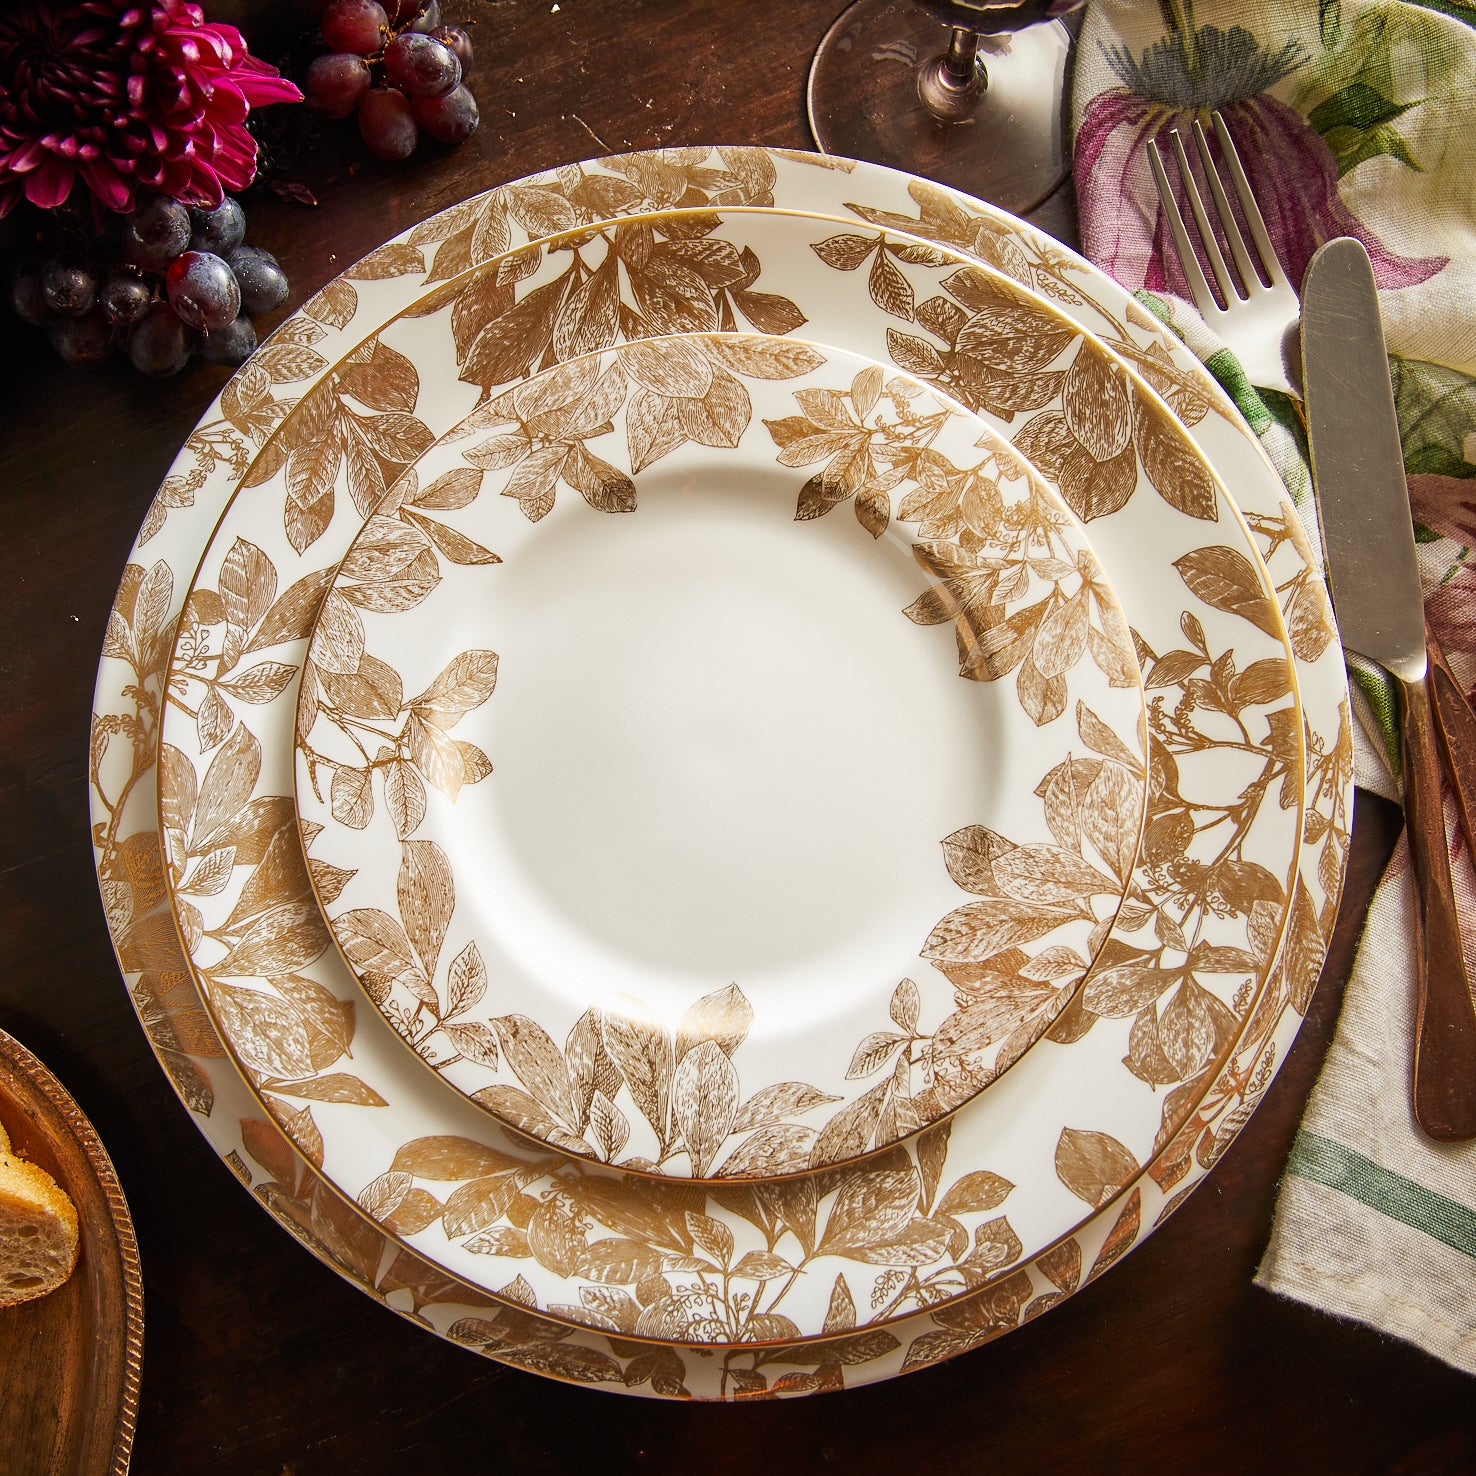 A Caskata Artisanal Home Arbor Gold Rimmed Charger with gold leaf pattern botanical details around the edge.